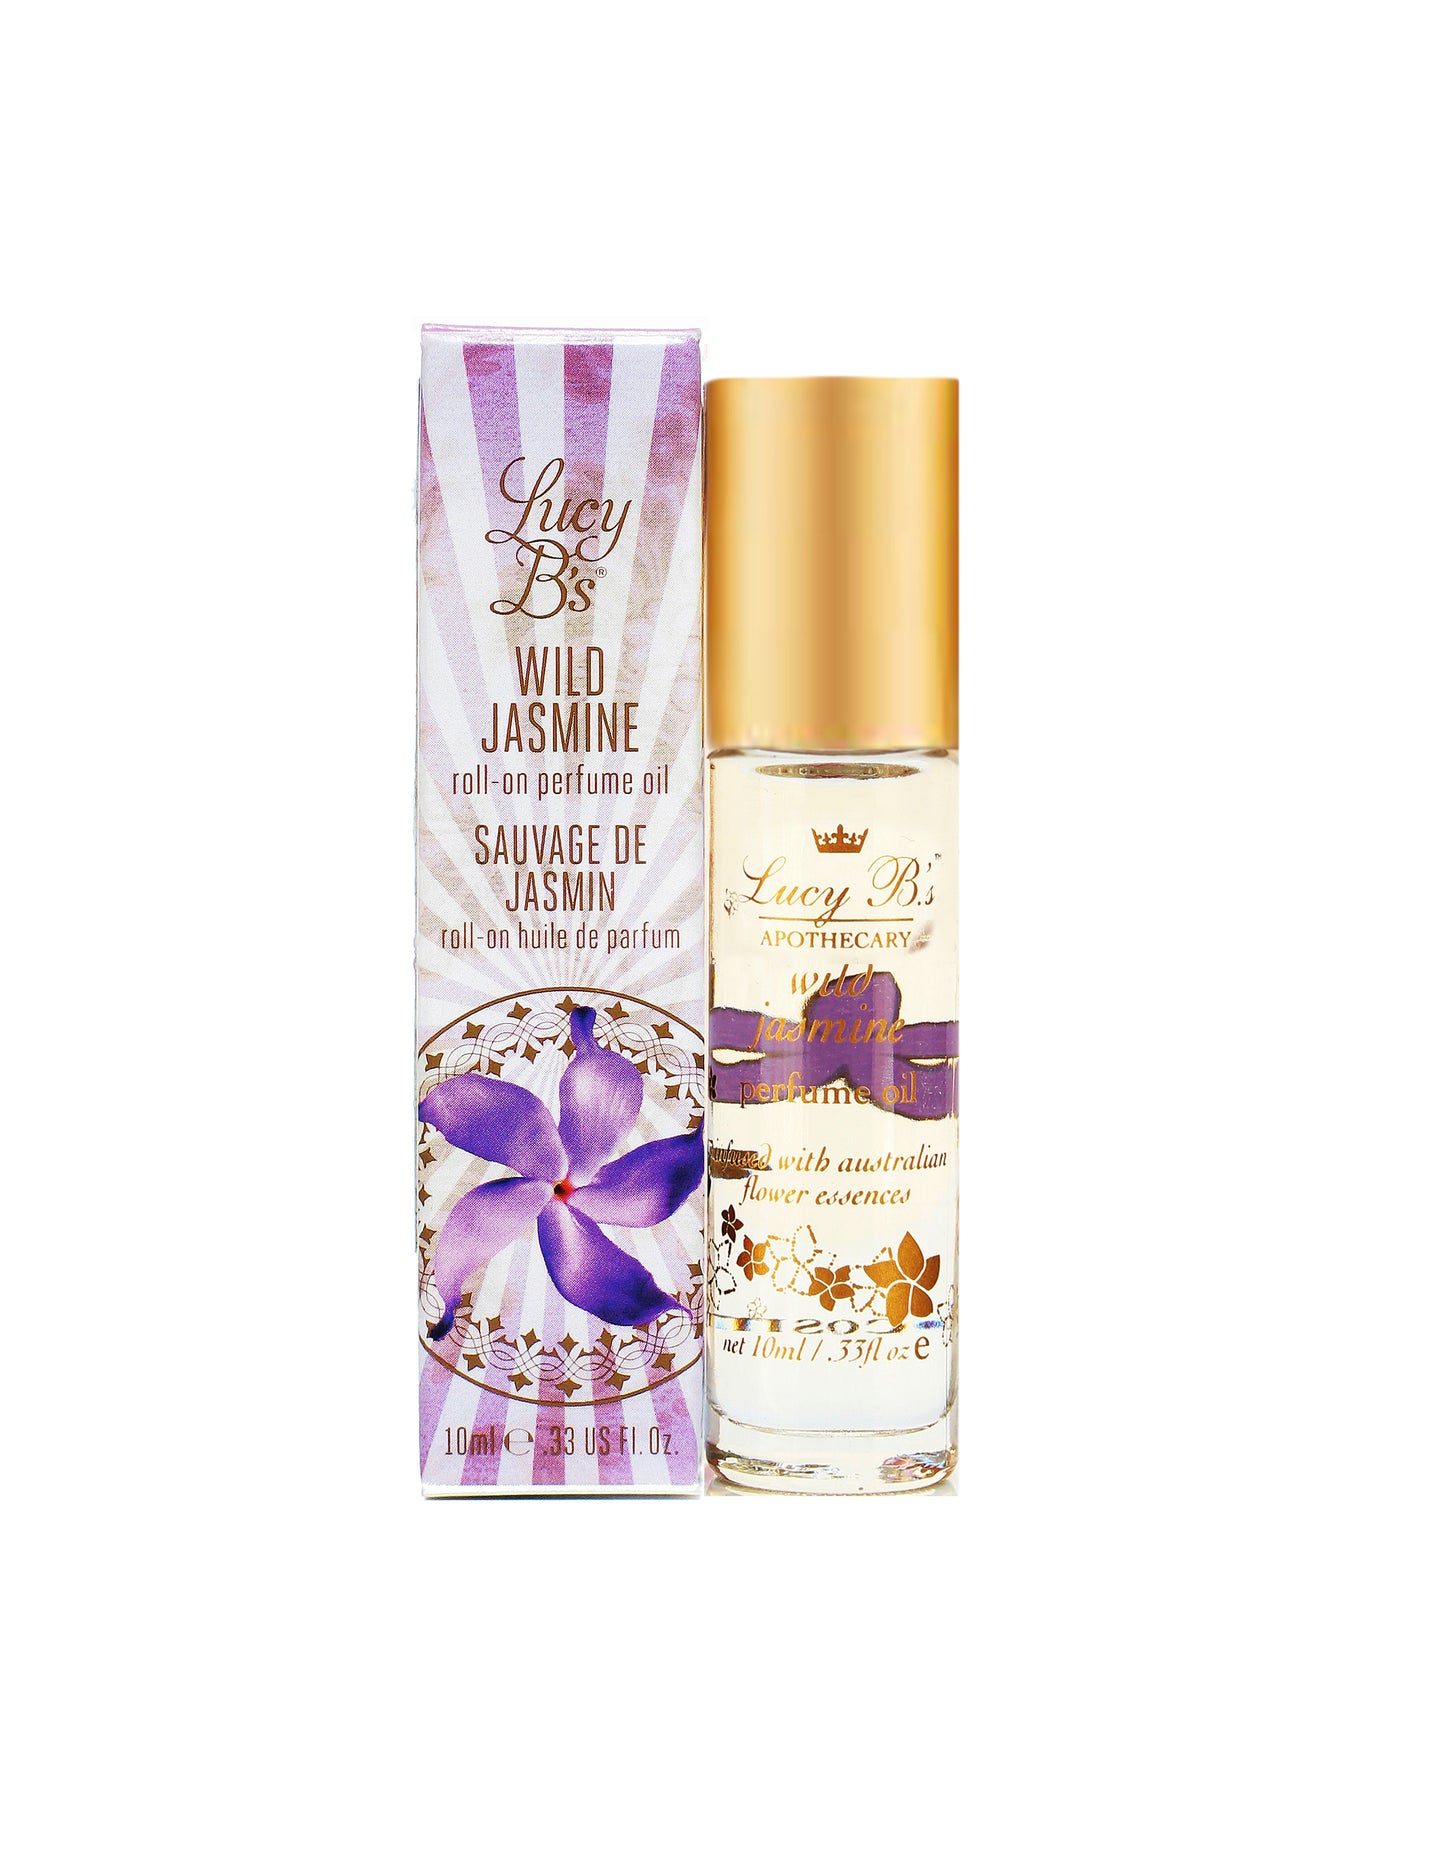 Jasmine Oil Oils Essential Oils Ships From Canada 